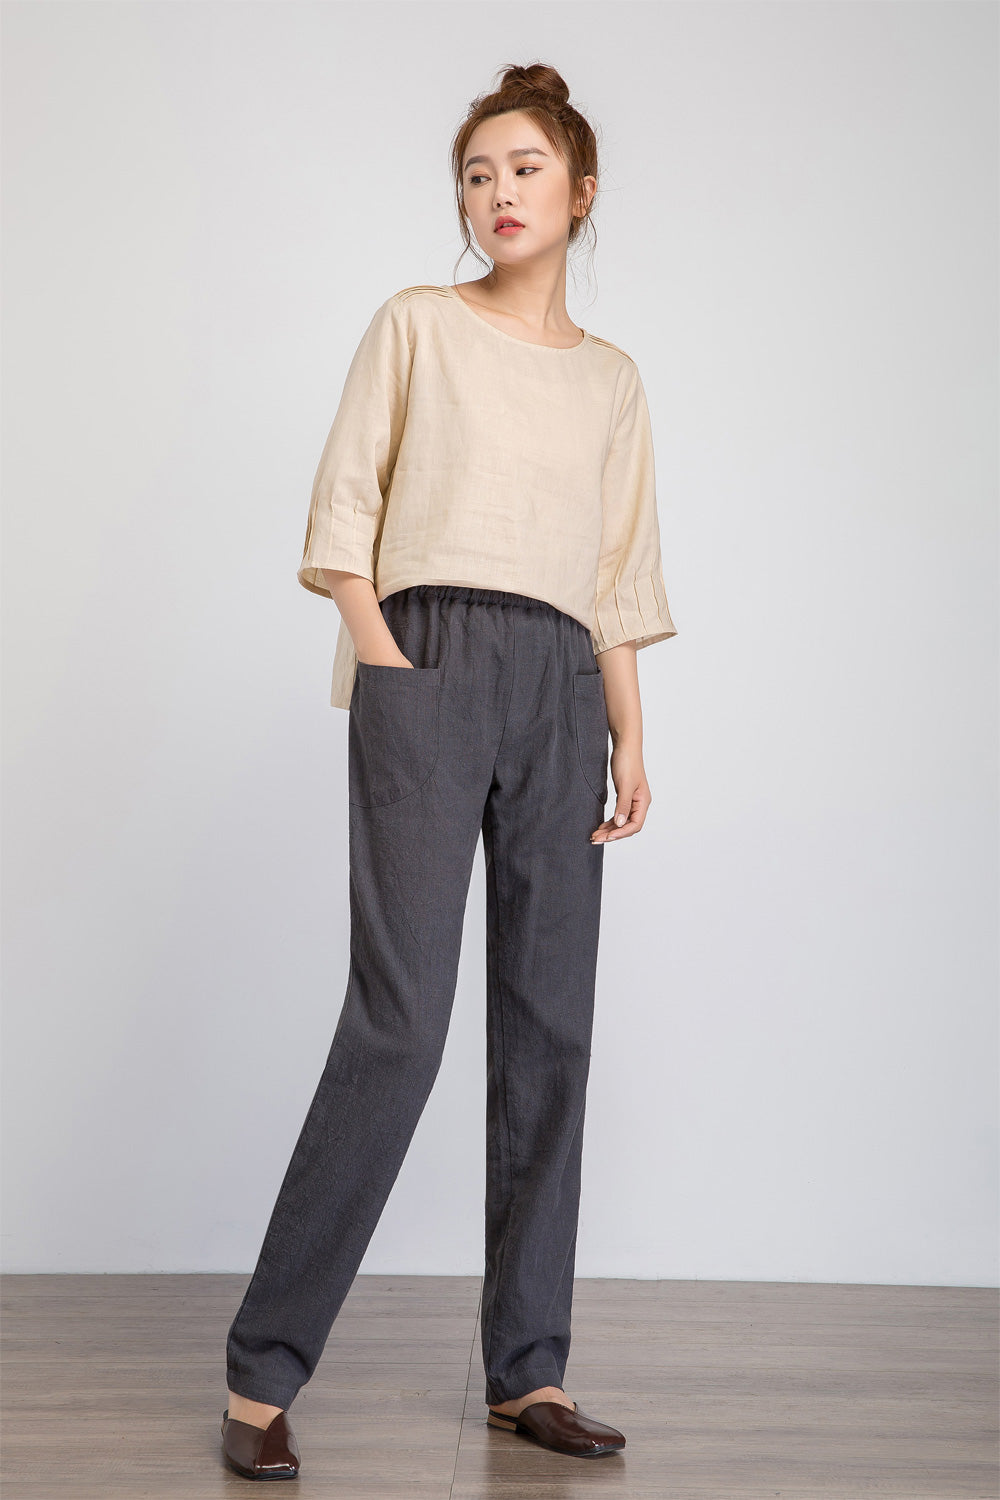 Loose Fitting Top and Straight Leg Elastic Waist Pants Womens